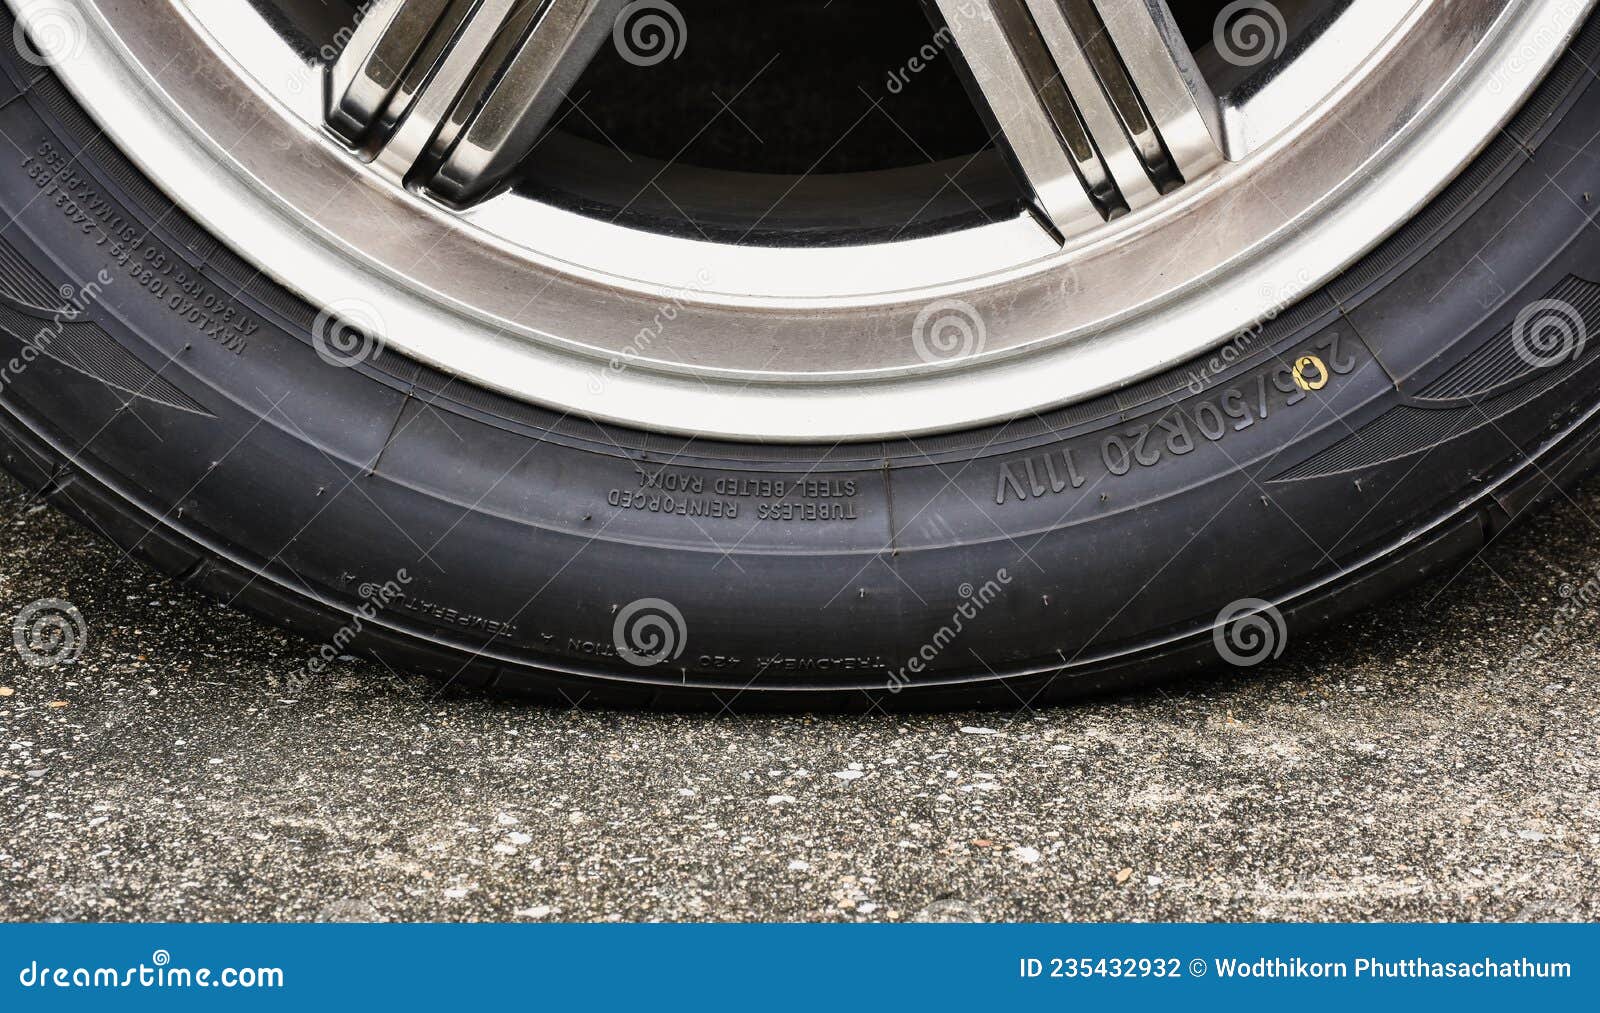 sidewall of the  car tire with a low tire pressure